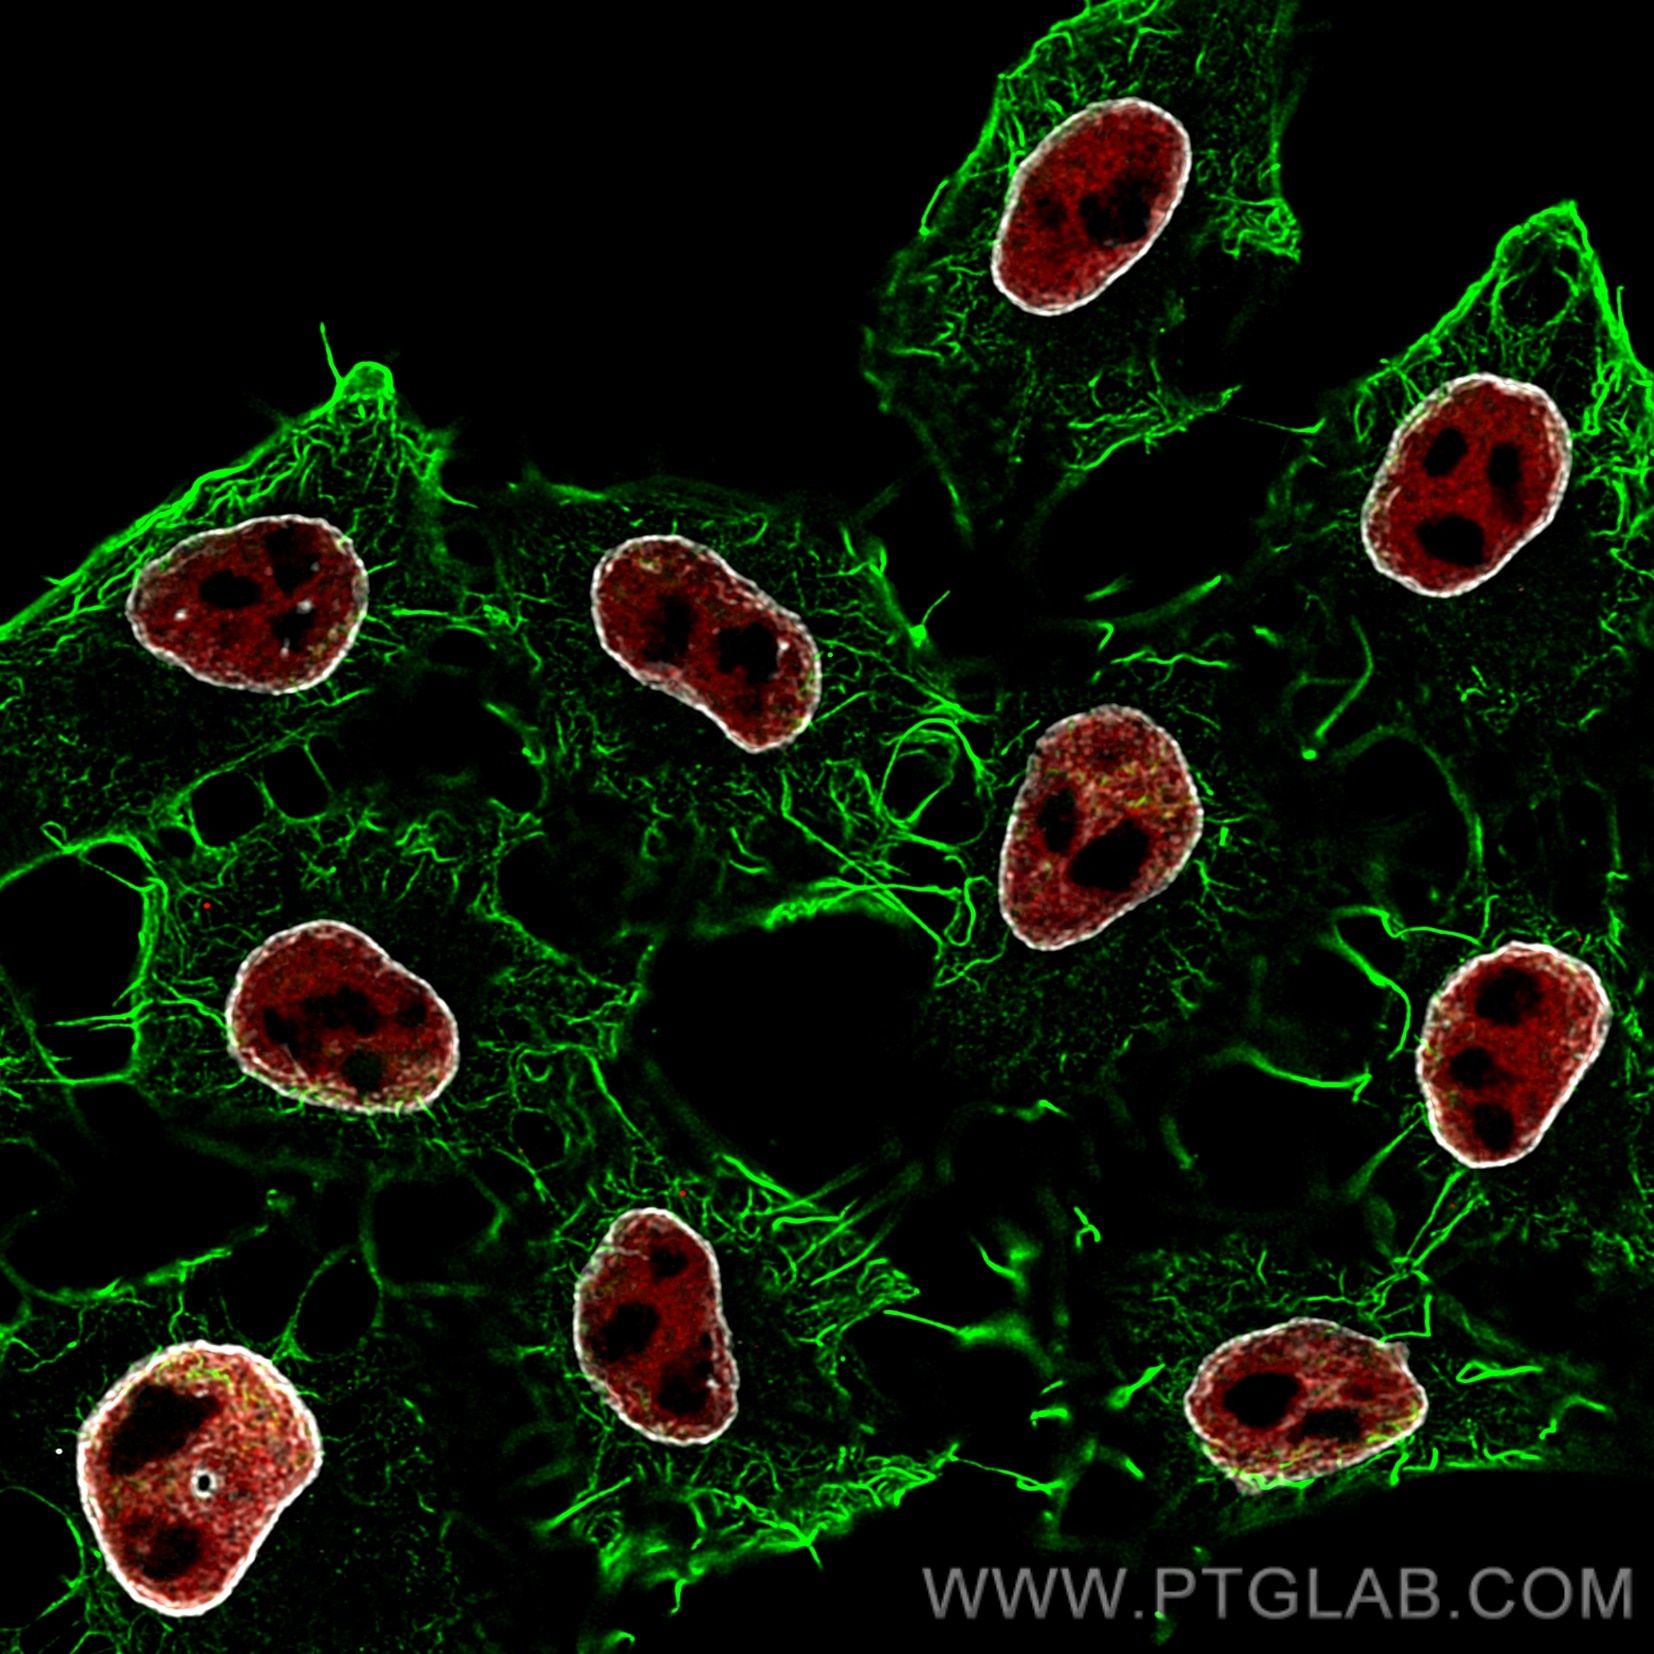 Immunofluorescence of HeLa: PFA-fixed HeLa cells were stained with anti-Actin antibody labeled with FlexAble CoraLite® Plus 488 Kit (KFA041, green), anti-HDAC2 (67165-1-Ig) labeled with FlexAble CoraLite® Plus 555 Kit (KFA062, red) and anti-Lamin antibody labeled with FlexAble CoraLite® Plus 647 Kit (KFA063, grey). Confocal images were acquired with a 100x oil objective and post-processed. Images were recorded at the Core Facility Bioimaging at the Biomedical Center, LMU Munich.